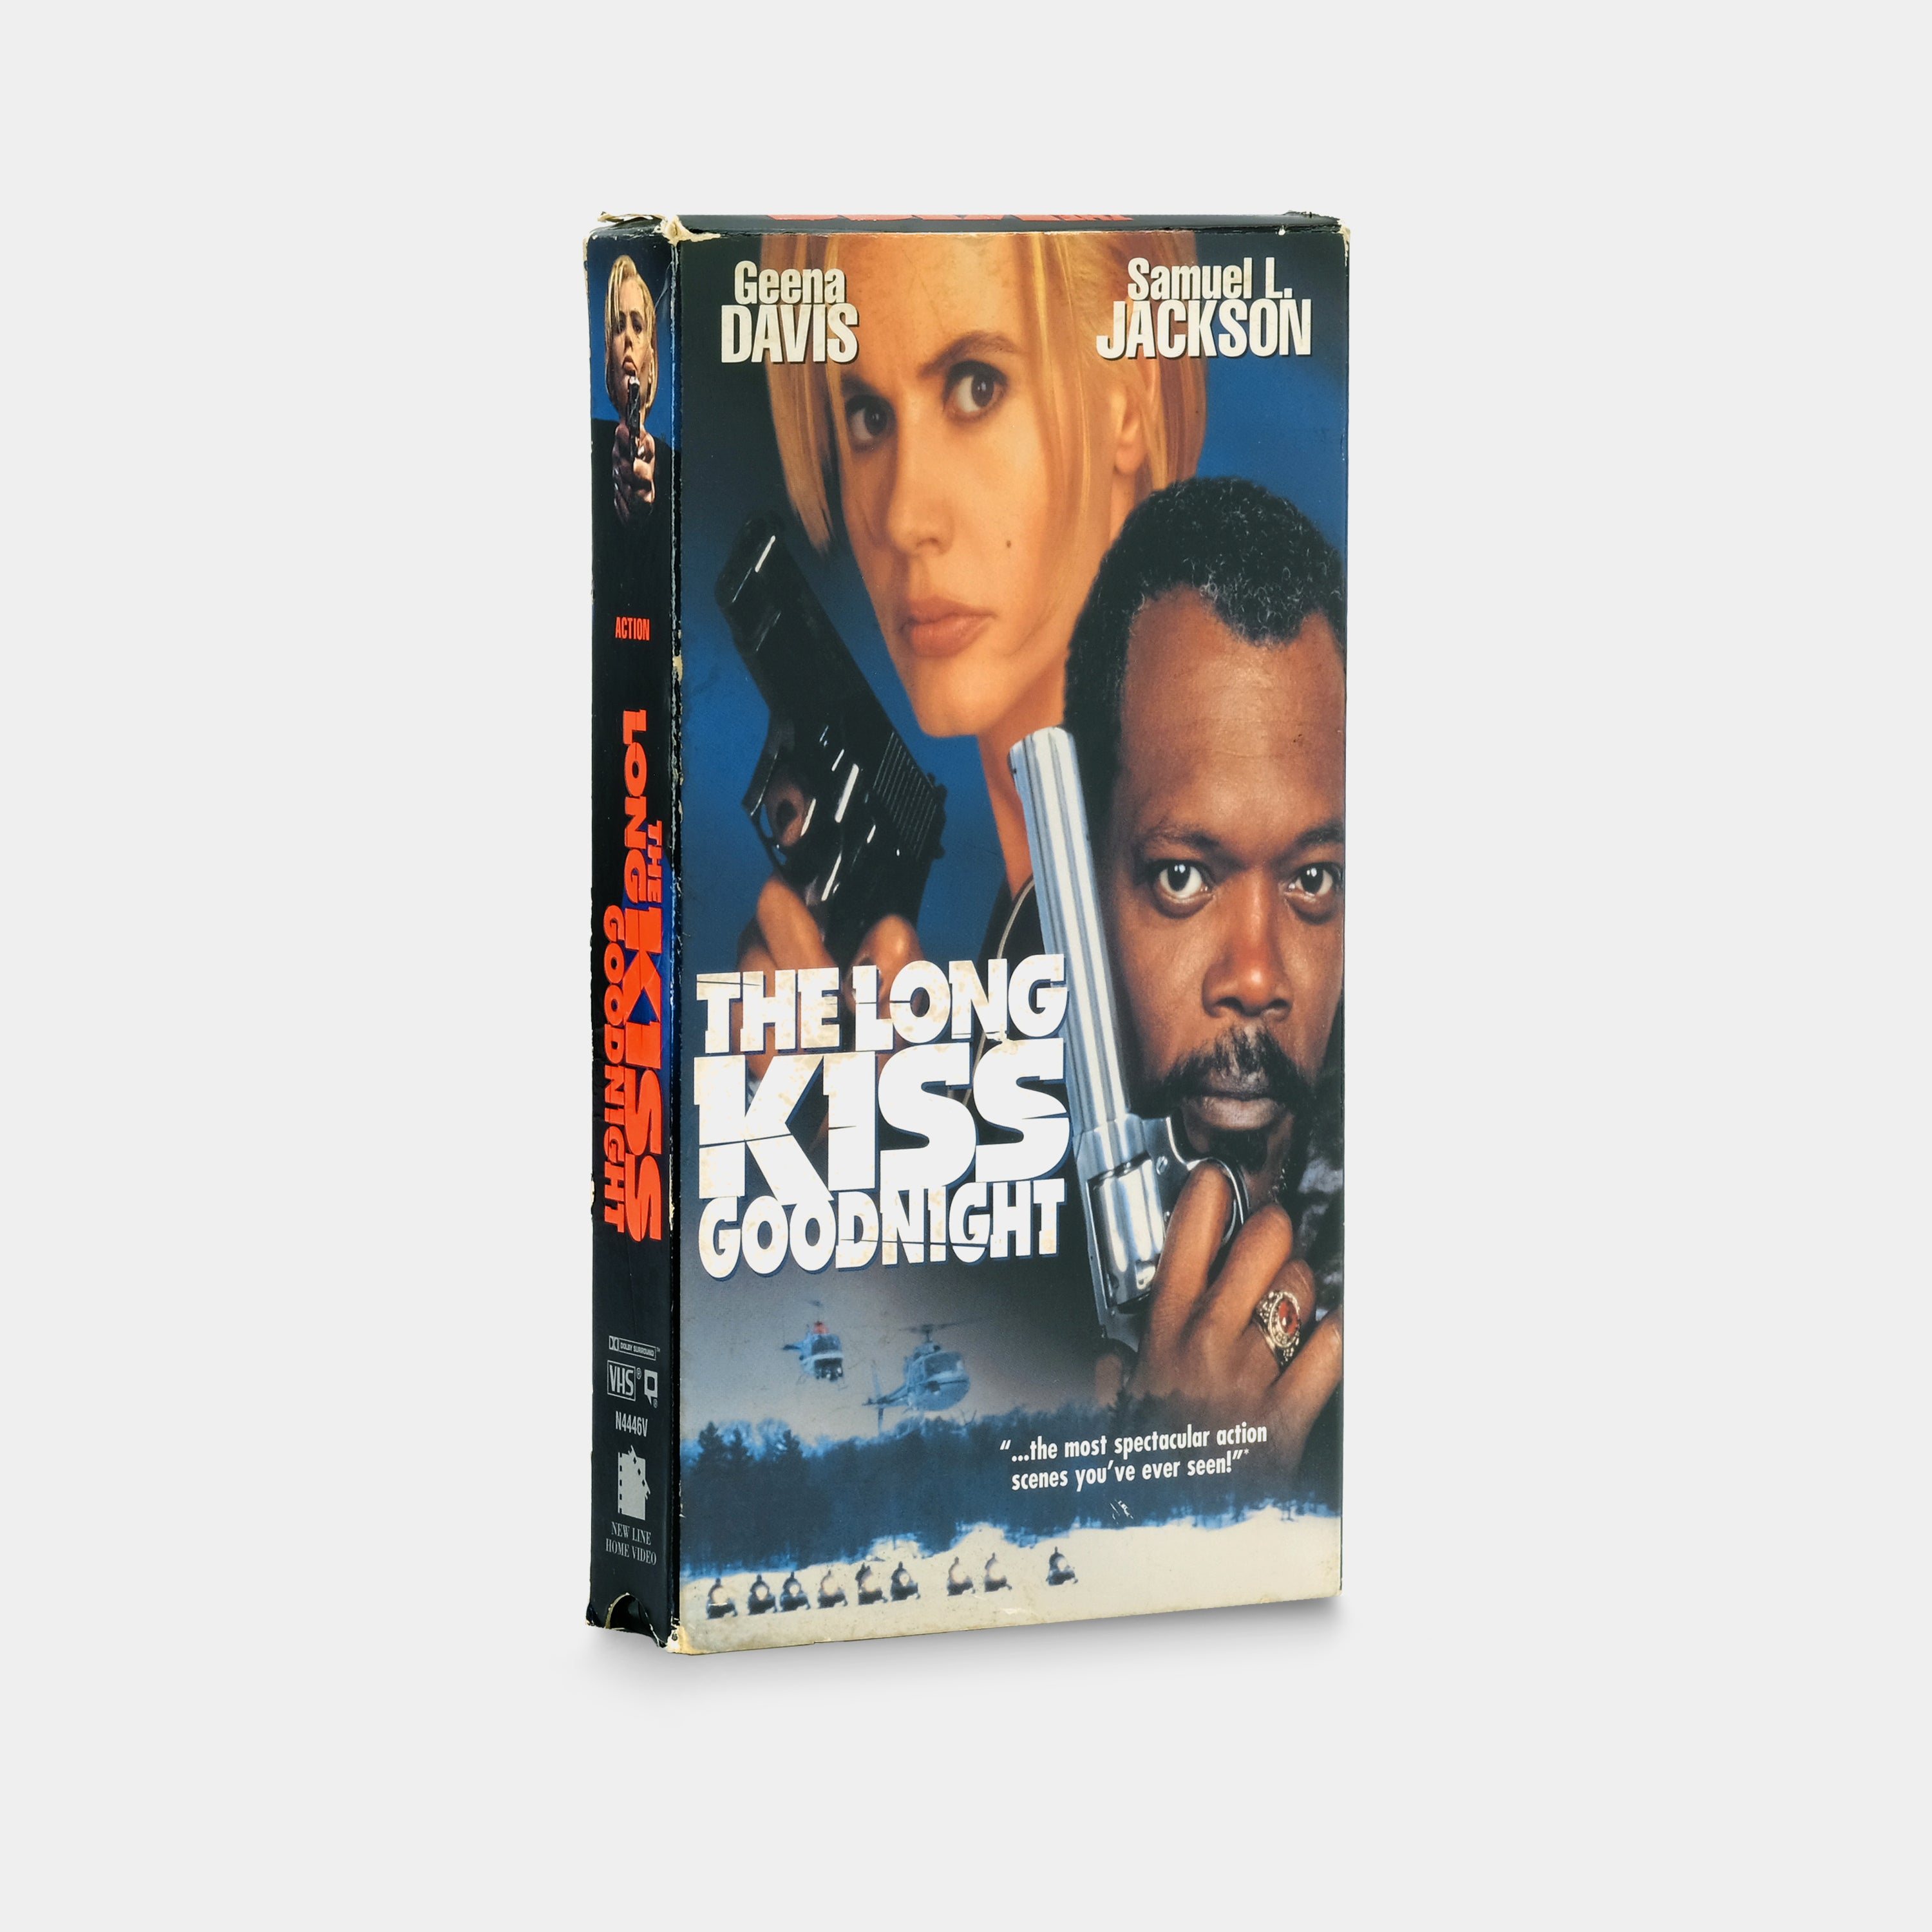 The Long Kiss Goodnight VHS Tape